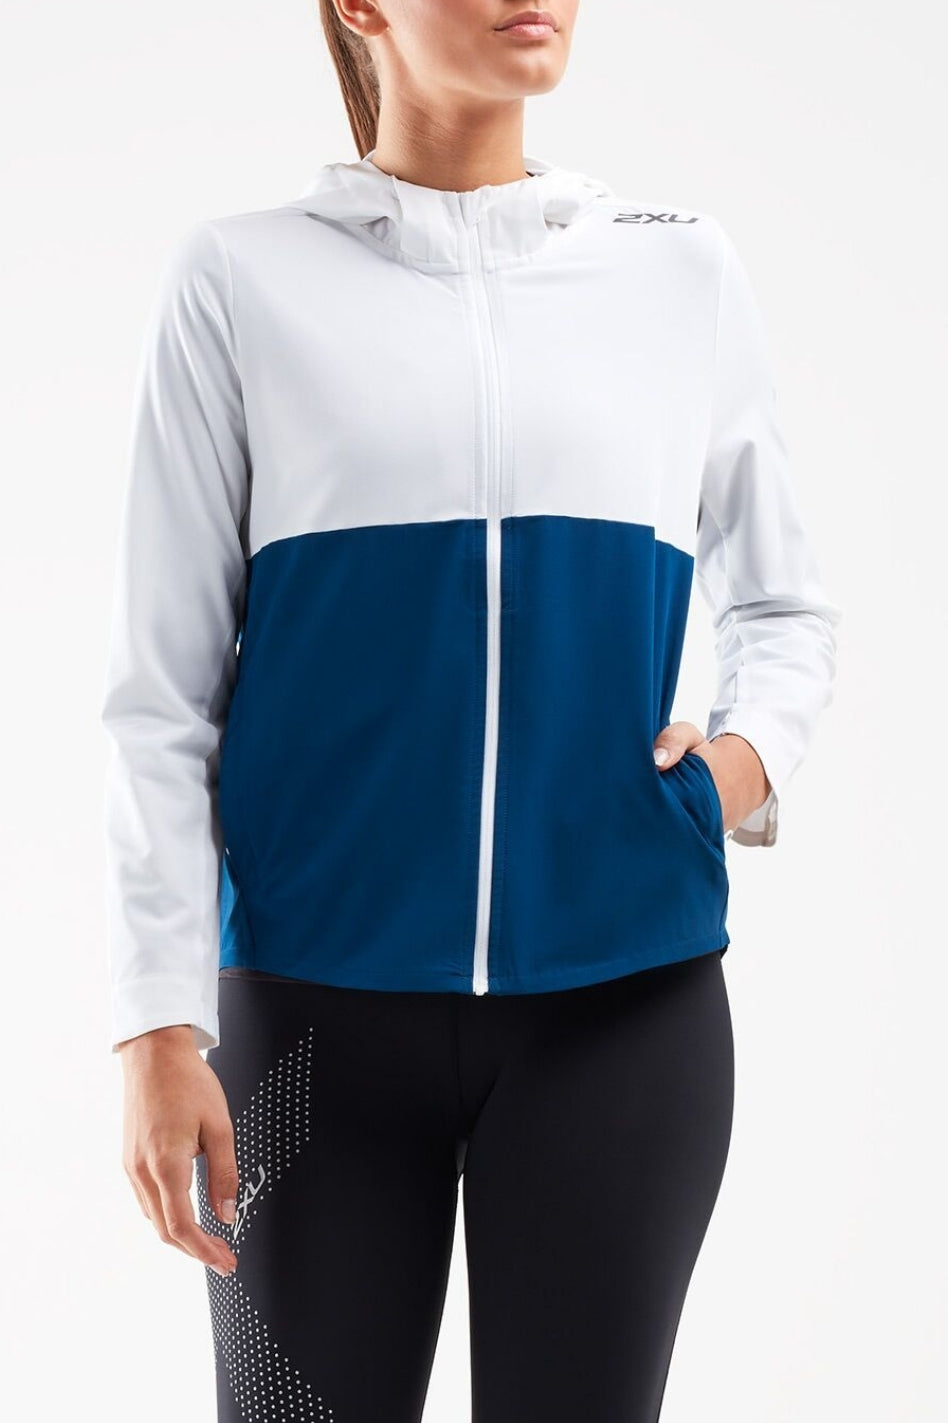 - Xvent DWR Jacket - Womens – inmotion shop